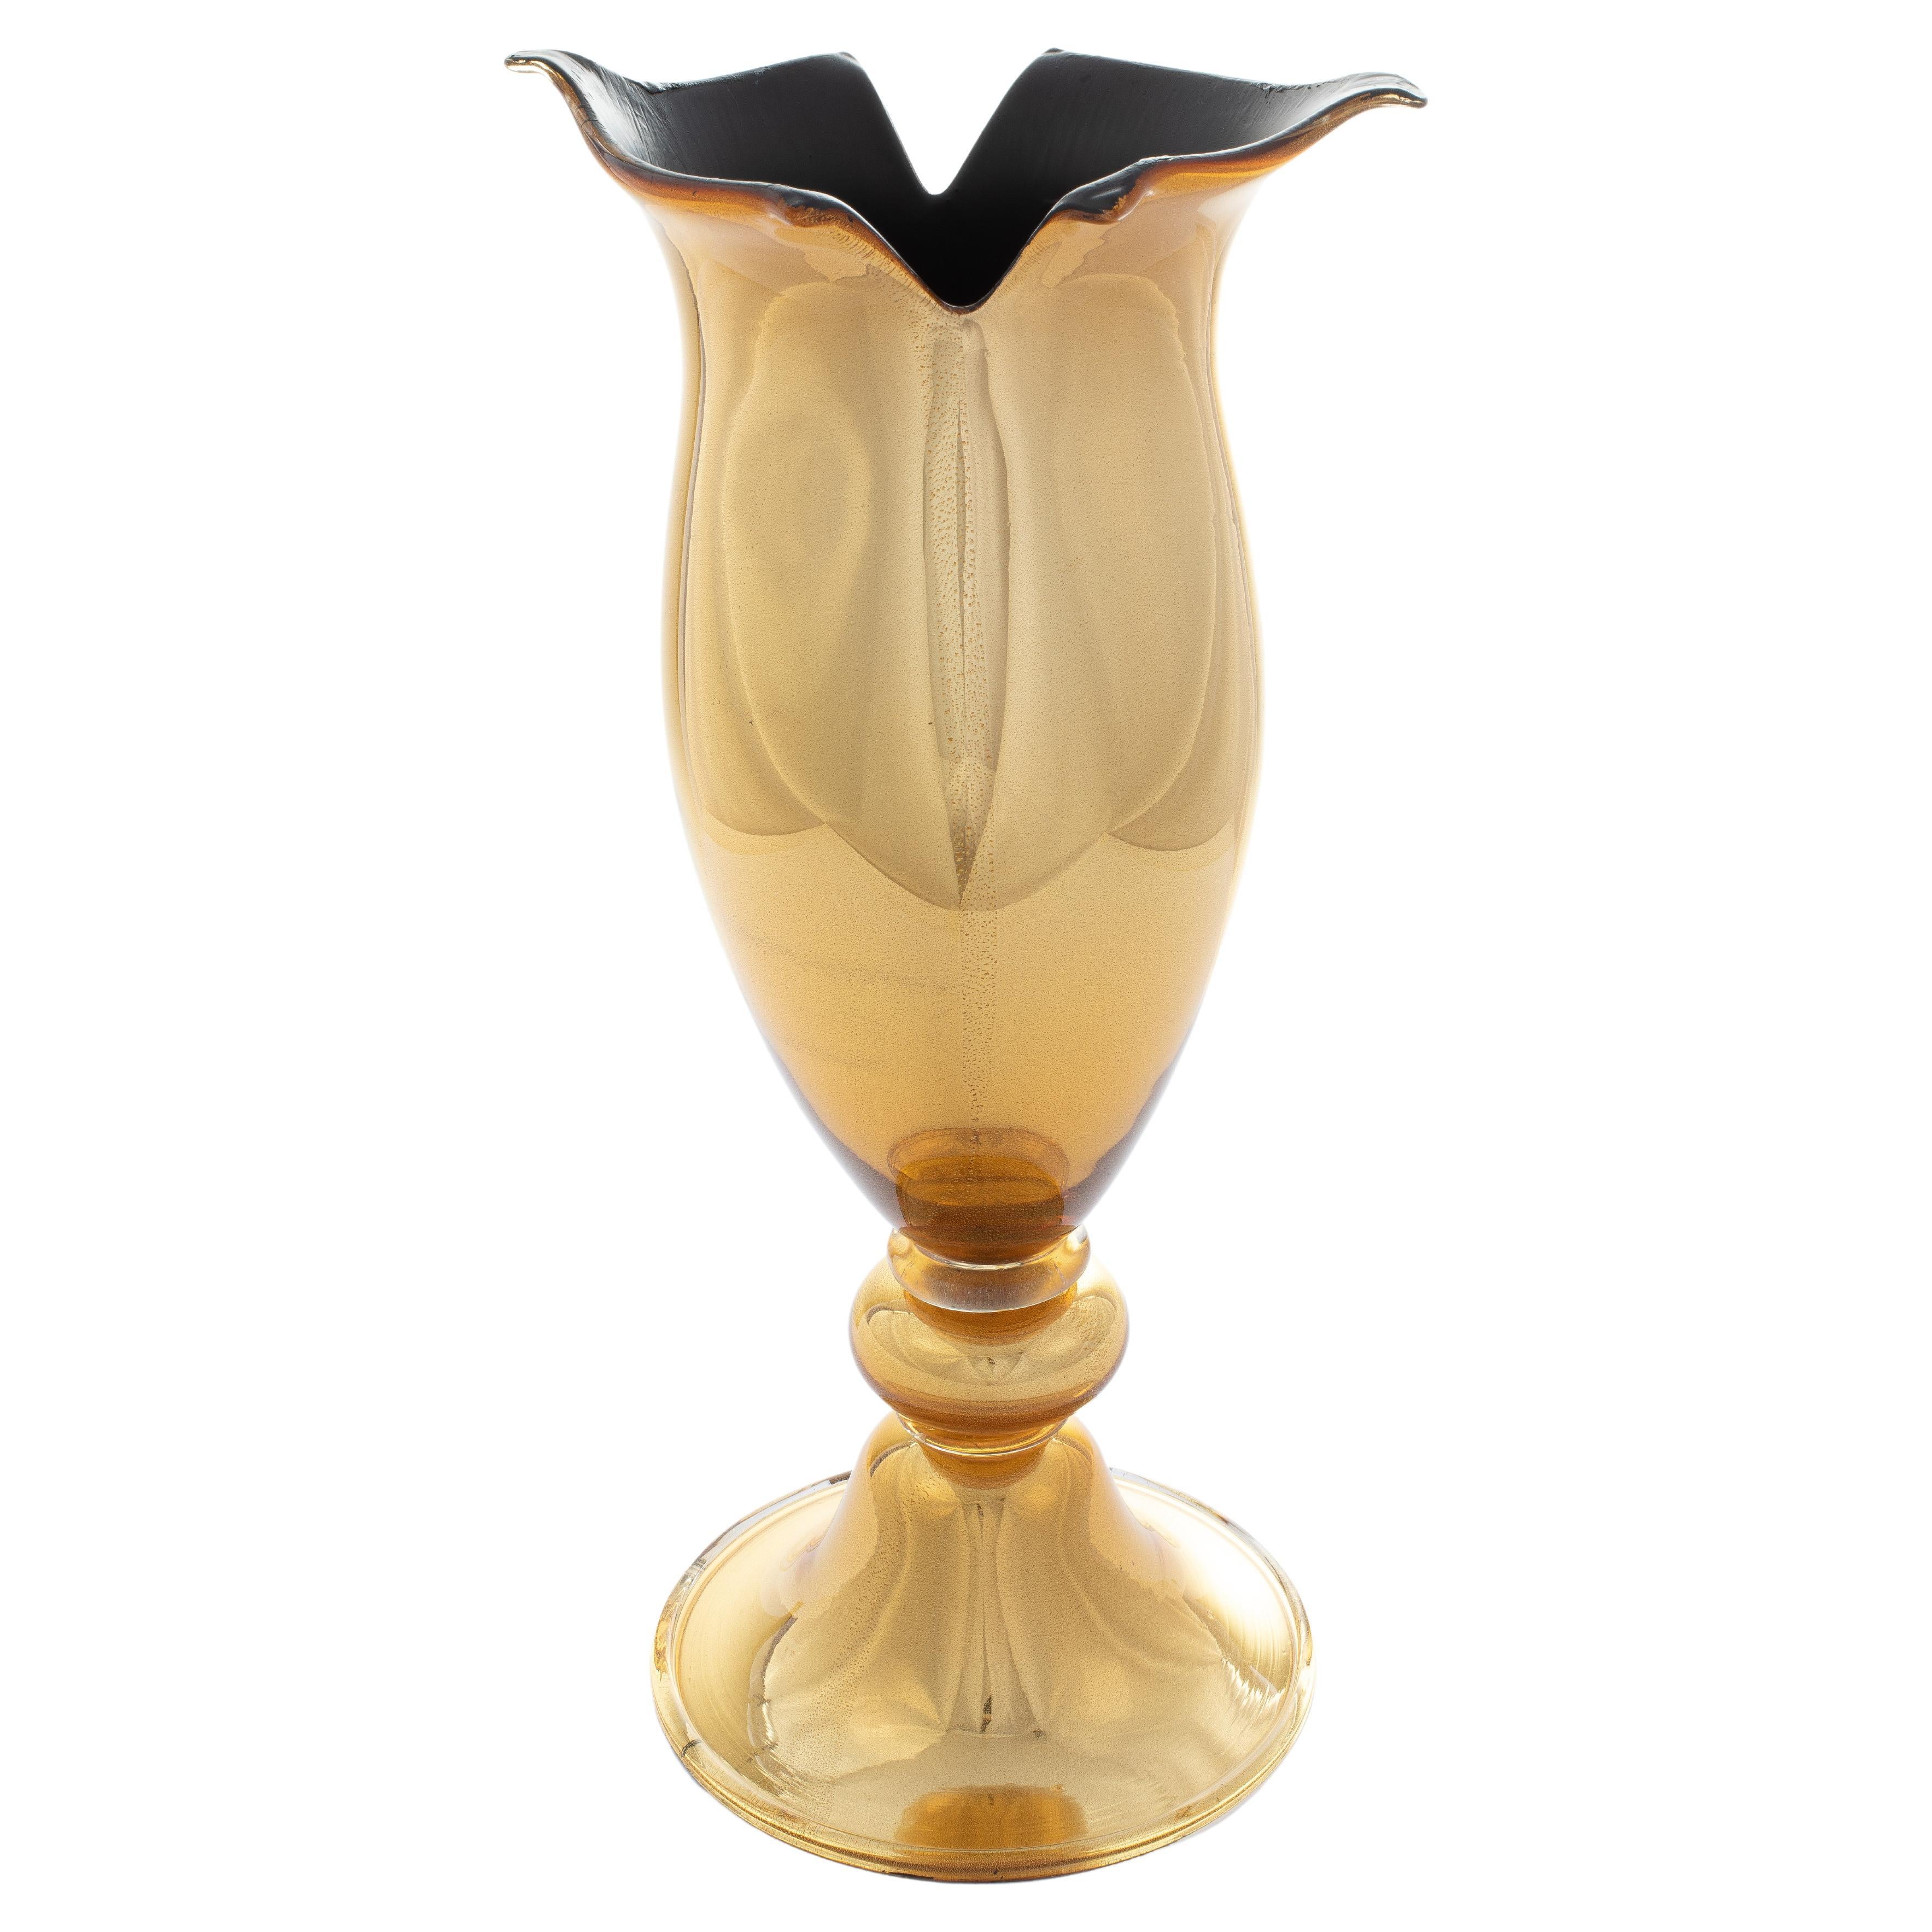 1295 Murano Hand Made Art Glass Gold Mirror Volo Masterpiece Vase For Sale